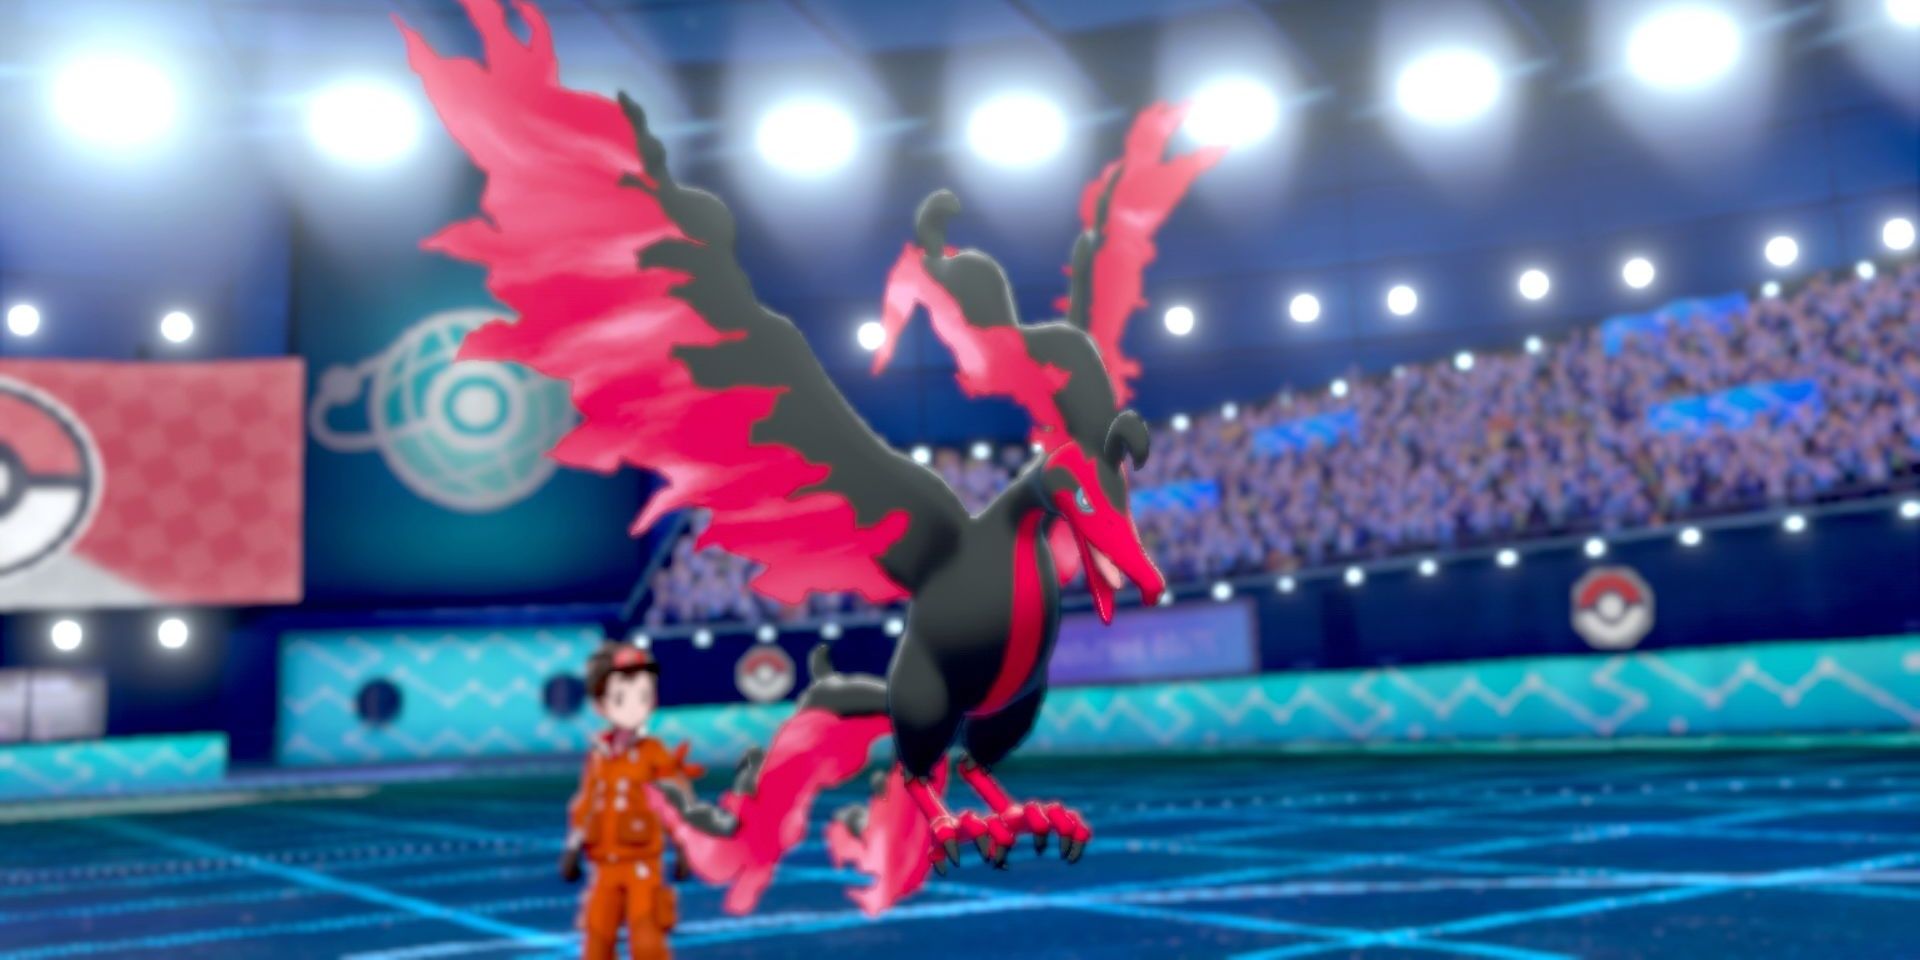 Galarian moltres in a stadium